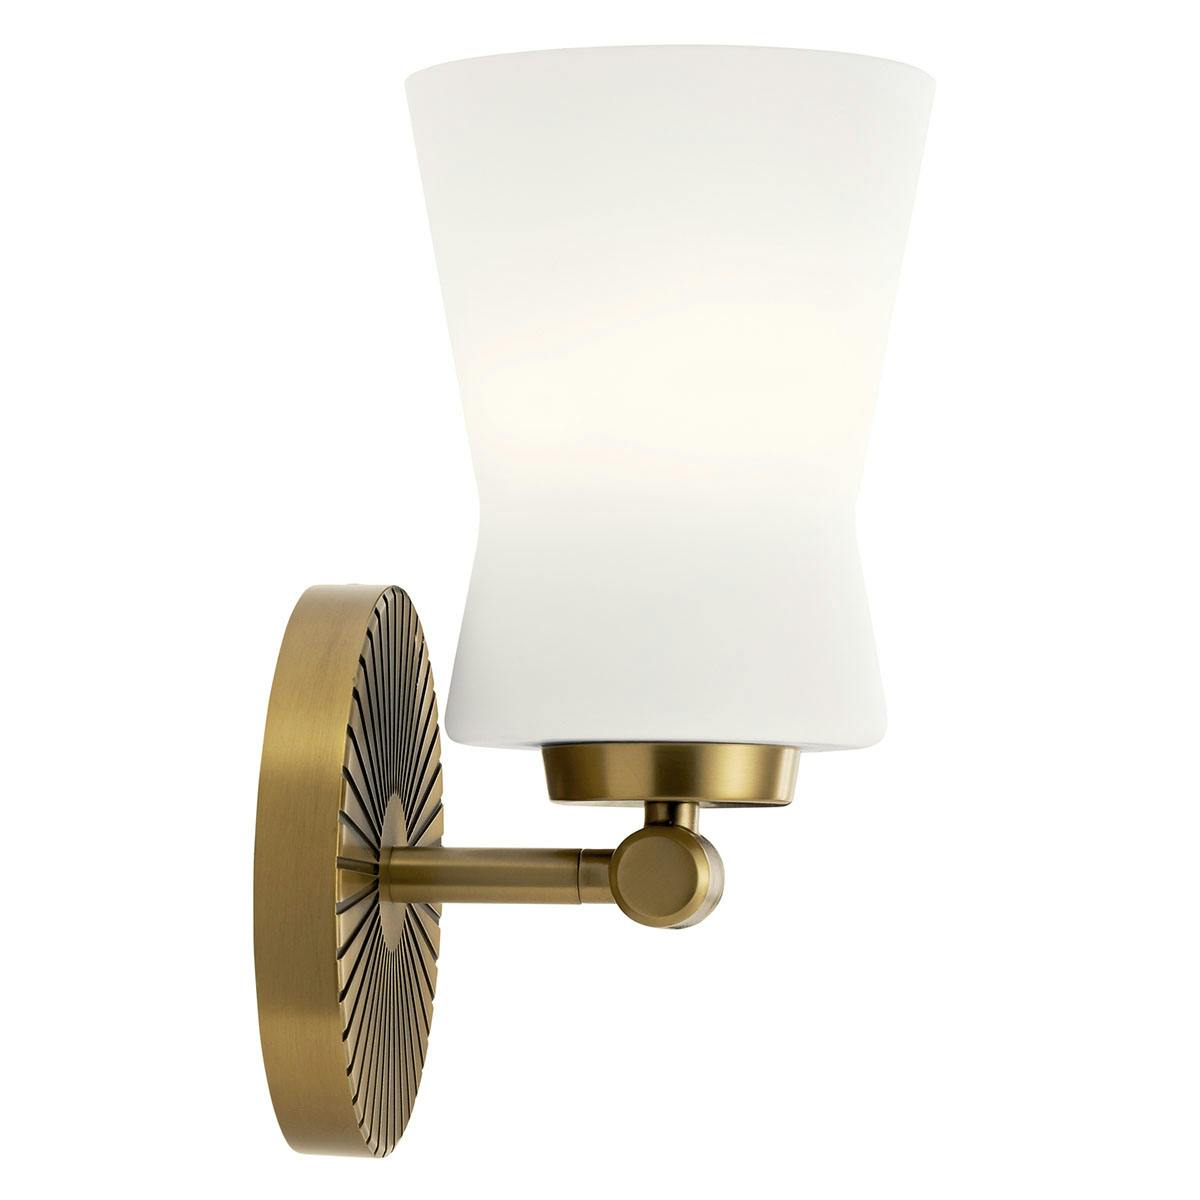 Profile view of the Brianne 9.5" 1 Light Sconce Brass on a white background